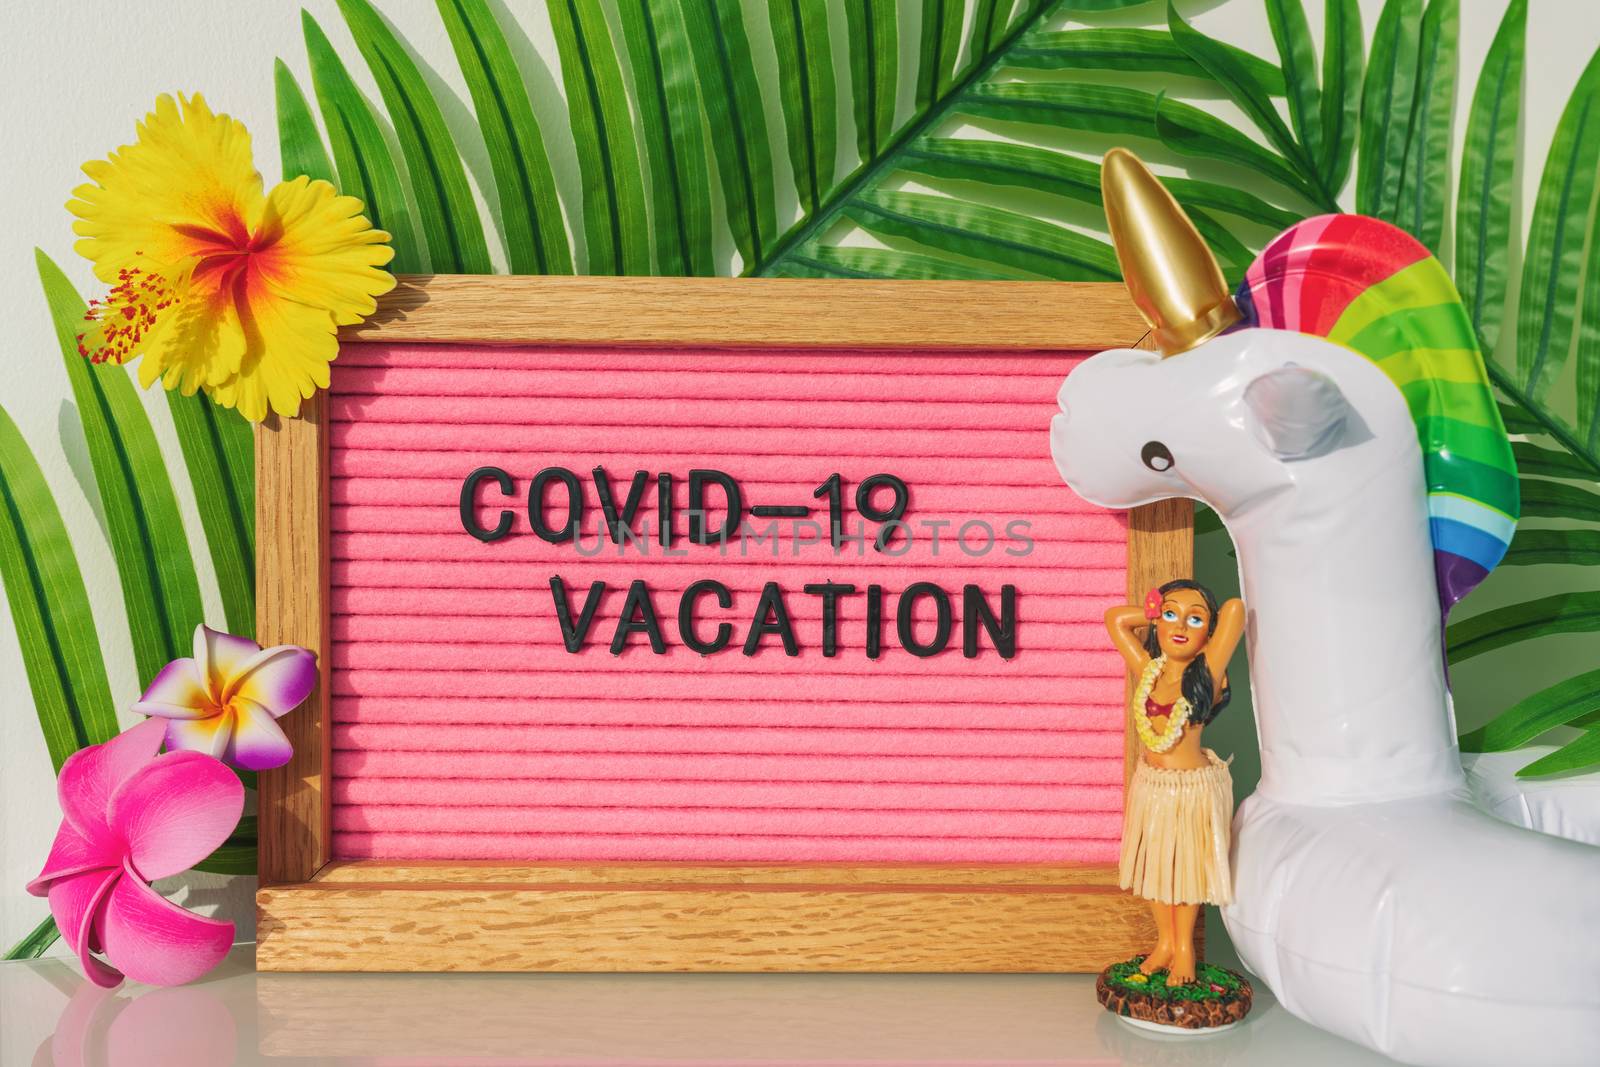 COVID-19 vacation at home pink funny sign for coronavirus travel restrictions this summer. Swimming pool toy float, hula dancer for tropical theme holidays in the backyard by Maridav